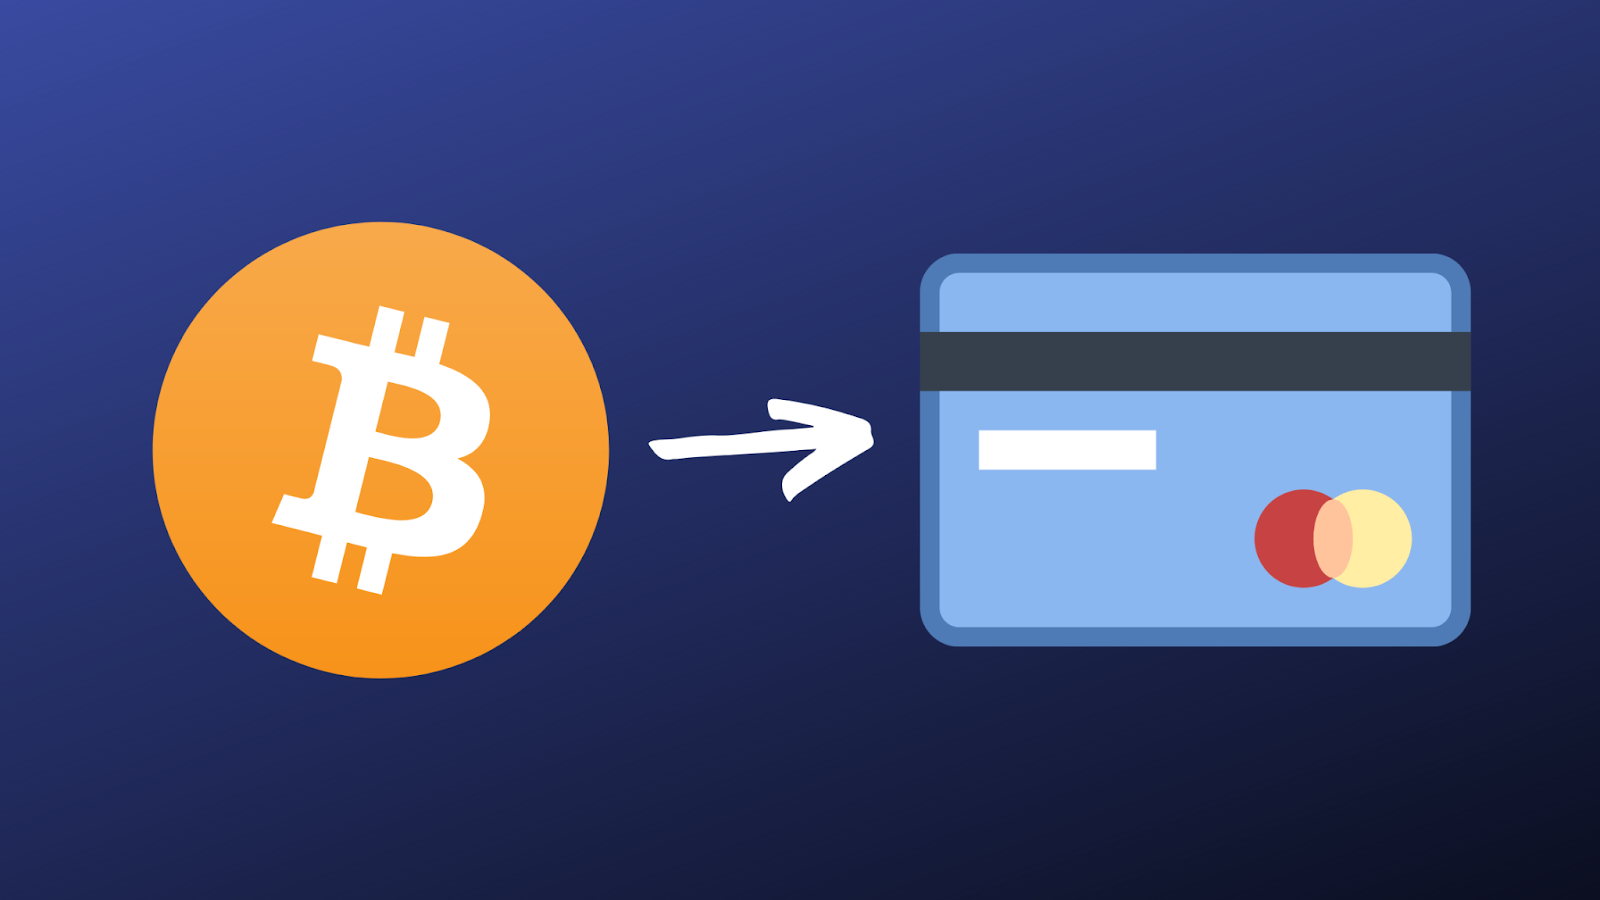 Bitcoin and bank card sign on a blue background